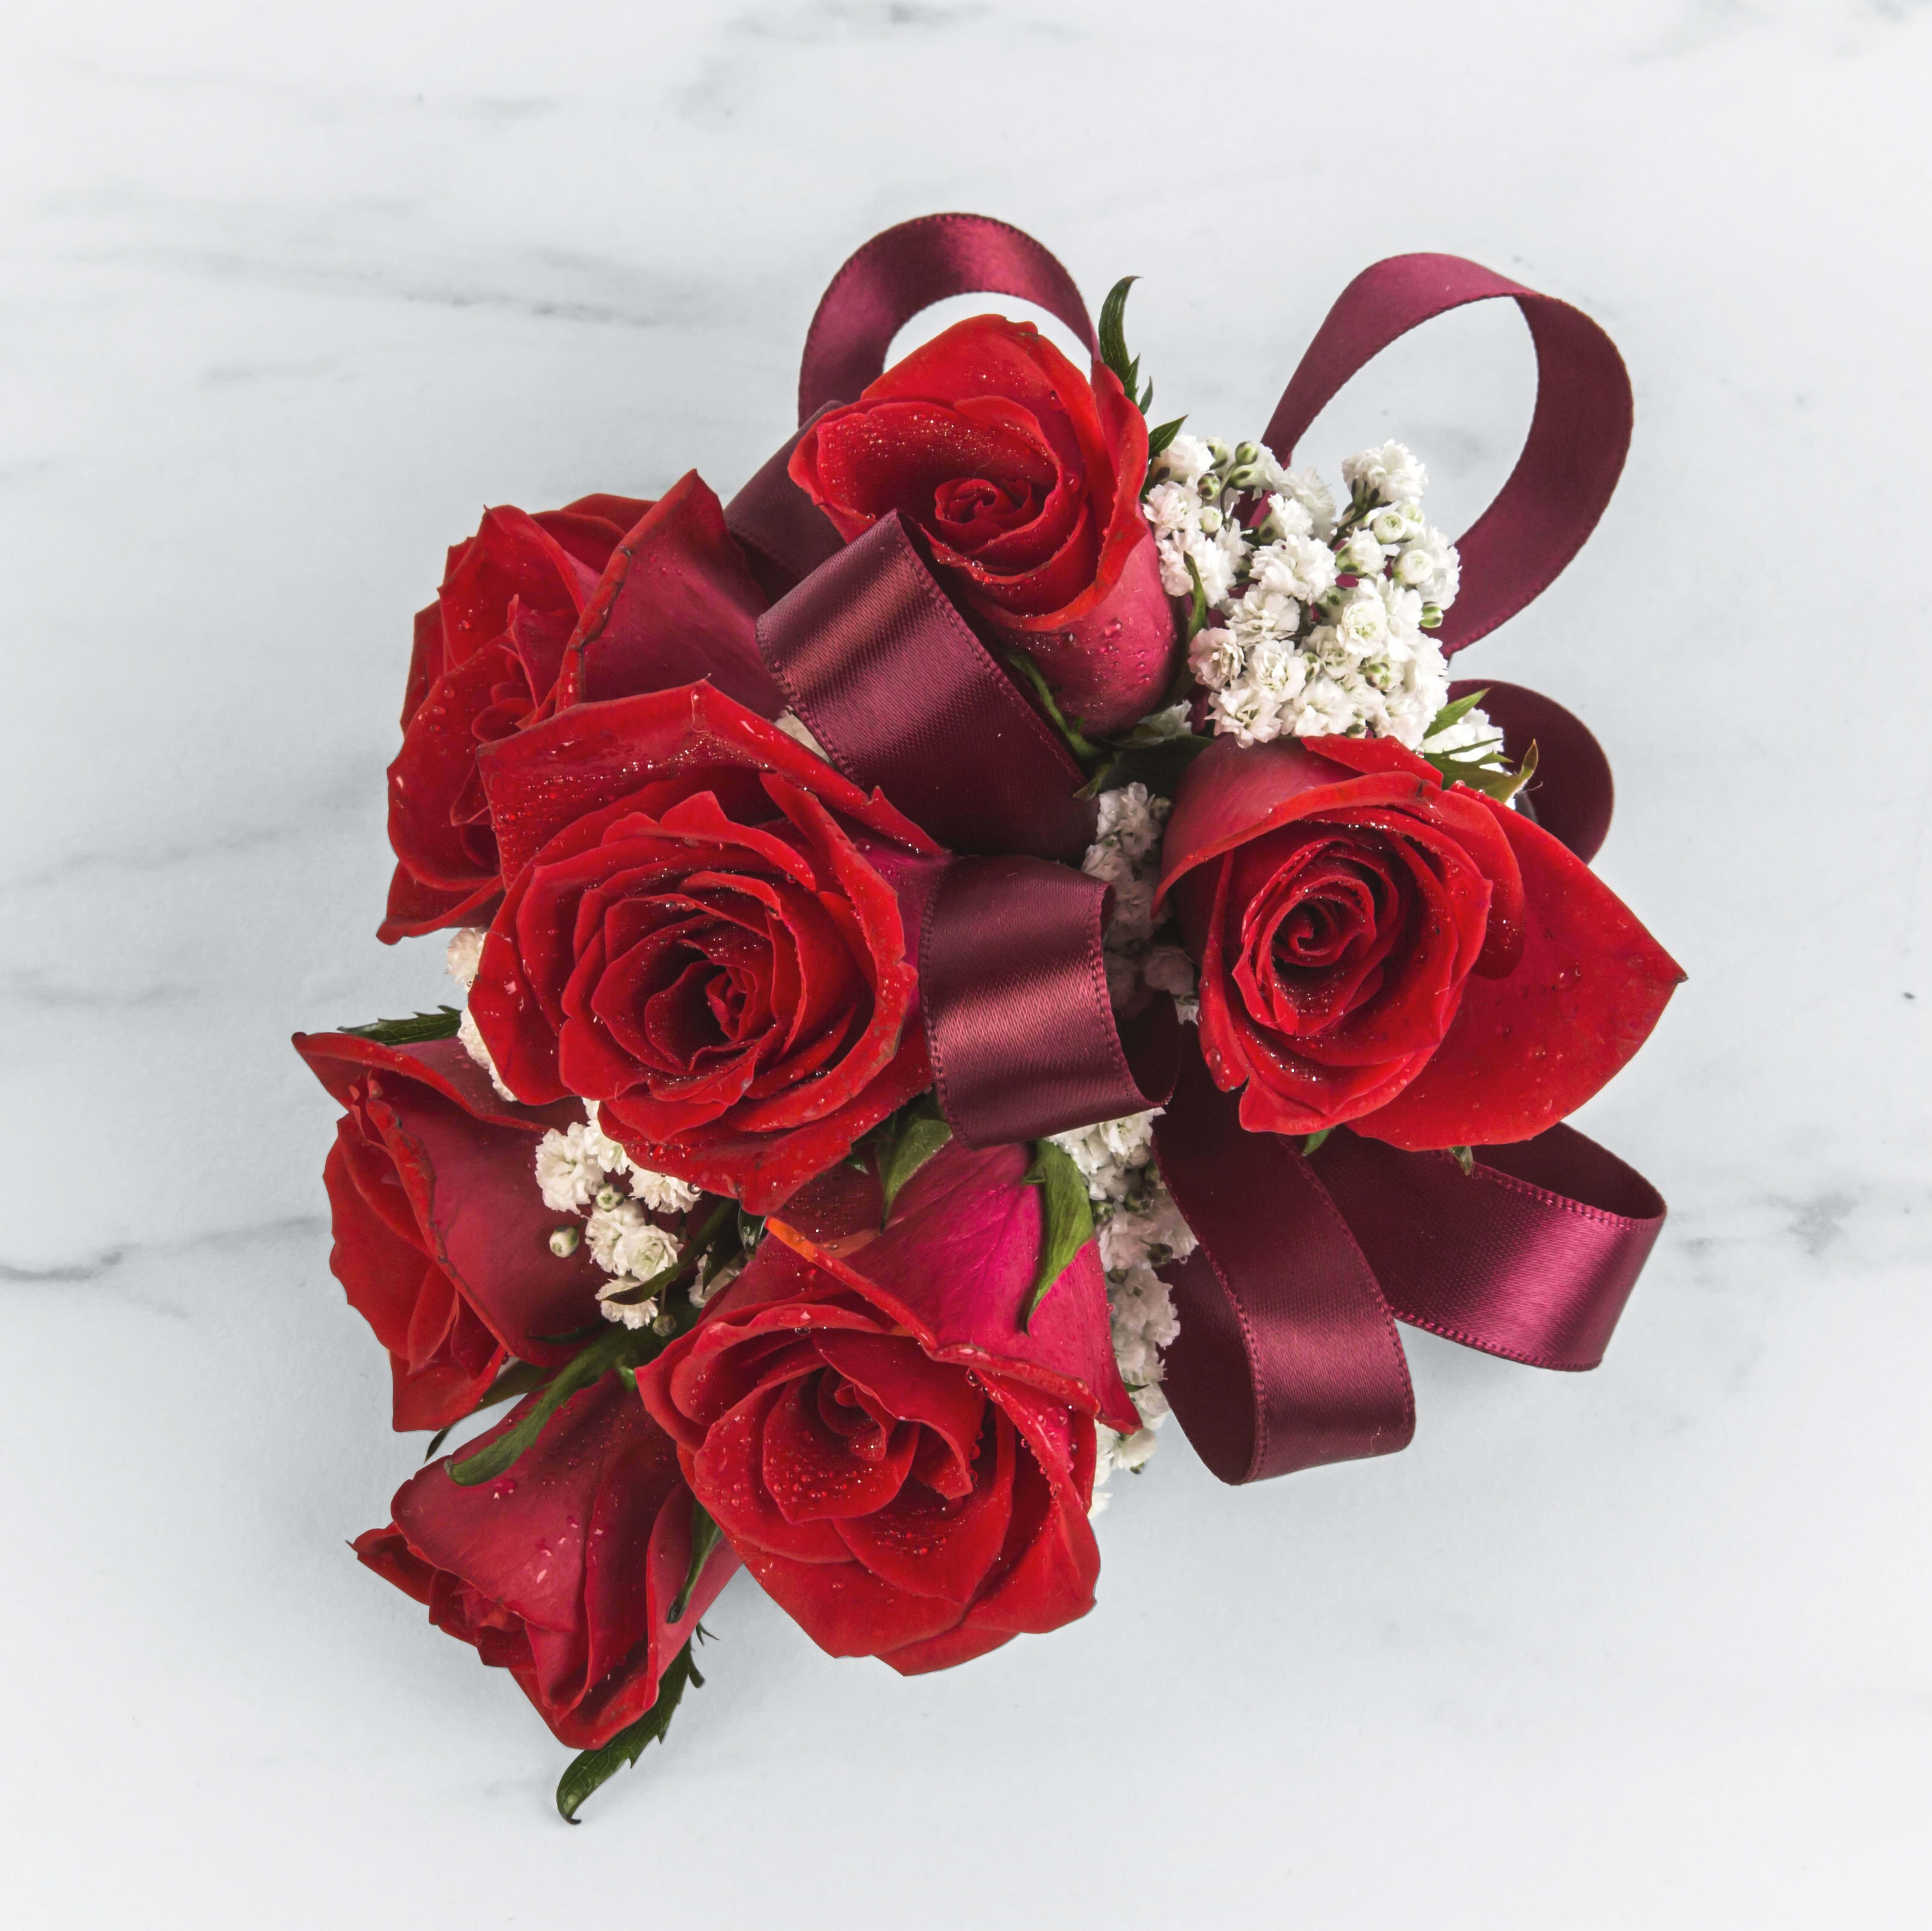 Red Rose Corsage  - A classic red rose and baby's breath corsage compliments any outfit. Perfect for prom, formal, and weddings.